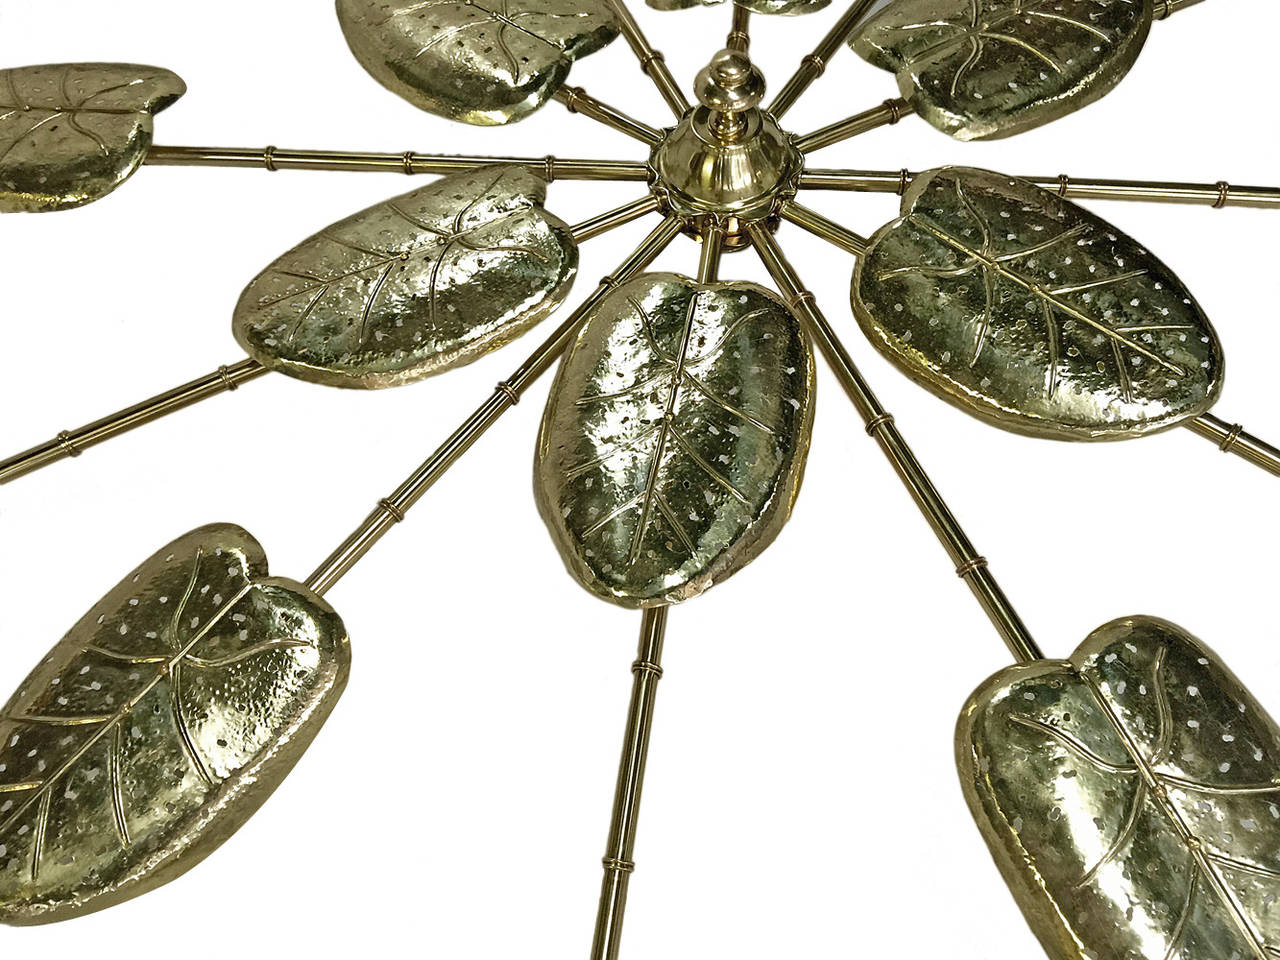 A large circa 1960's Italian polished brass flush-mounted fixture with 18 leaf shaped applied elements and 36 lights.

Measurements:
Diameter: 93